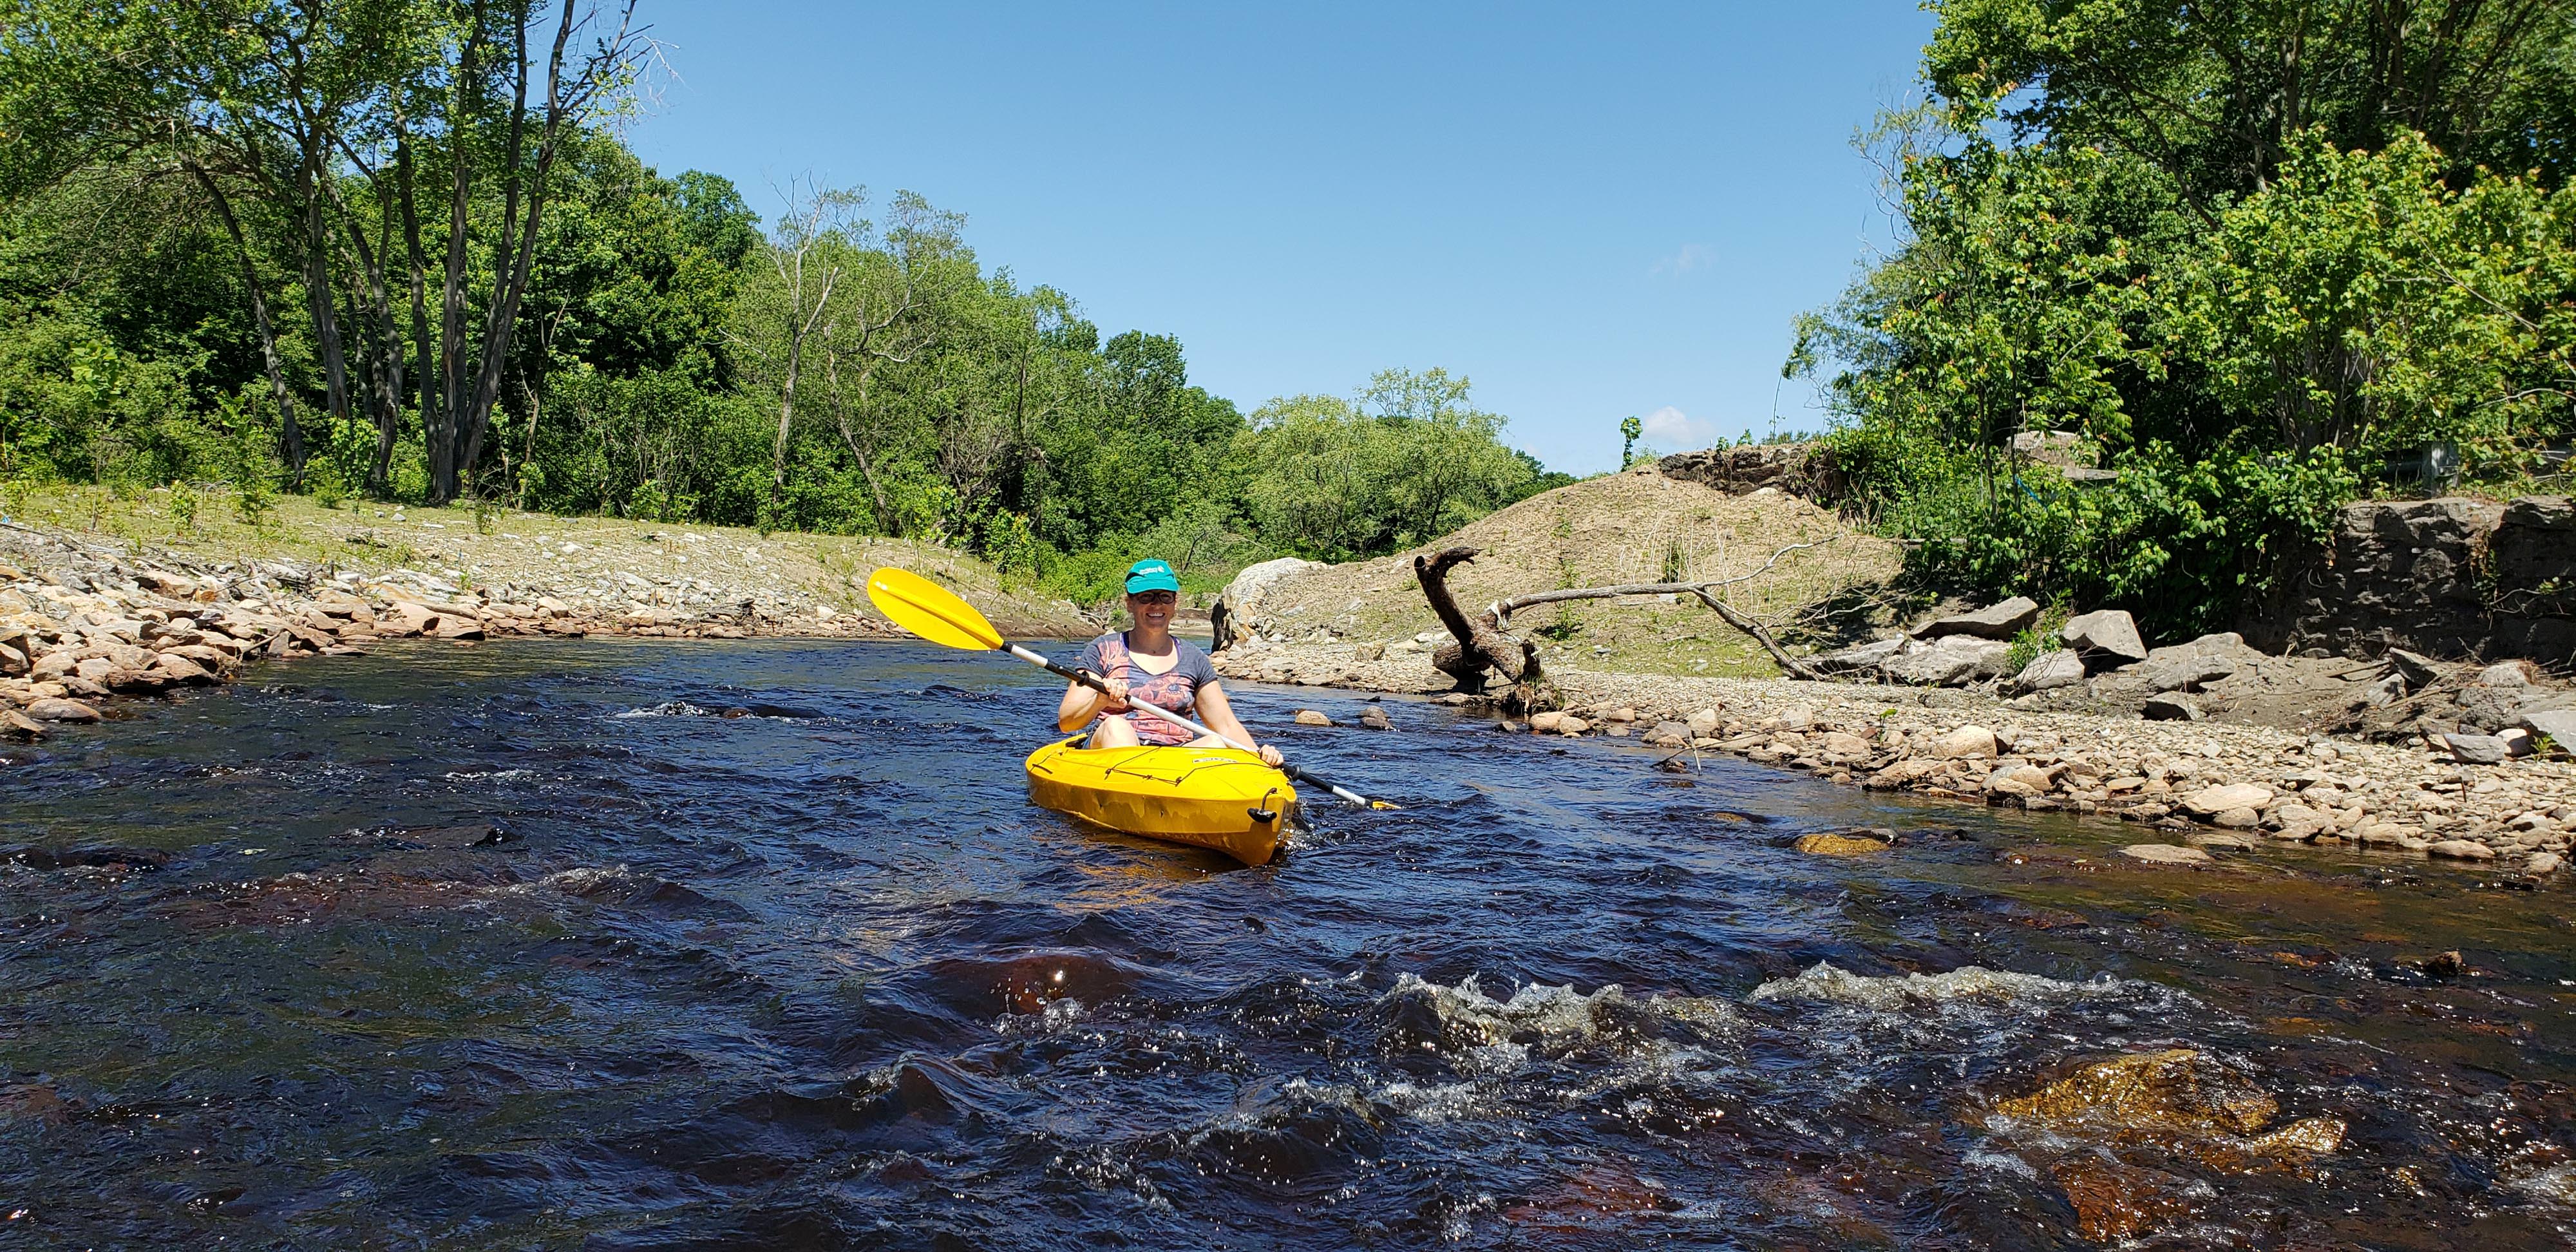 A woman kayaks toward the camera on the Mill River, which is surrounded by rocks and greenery.